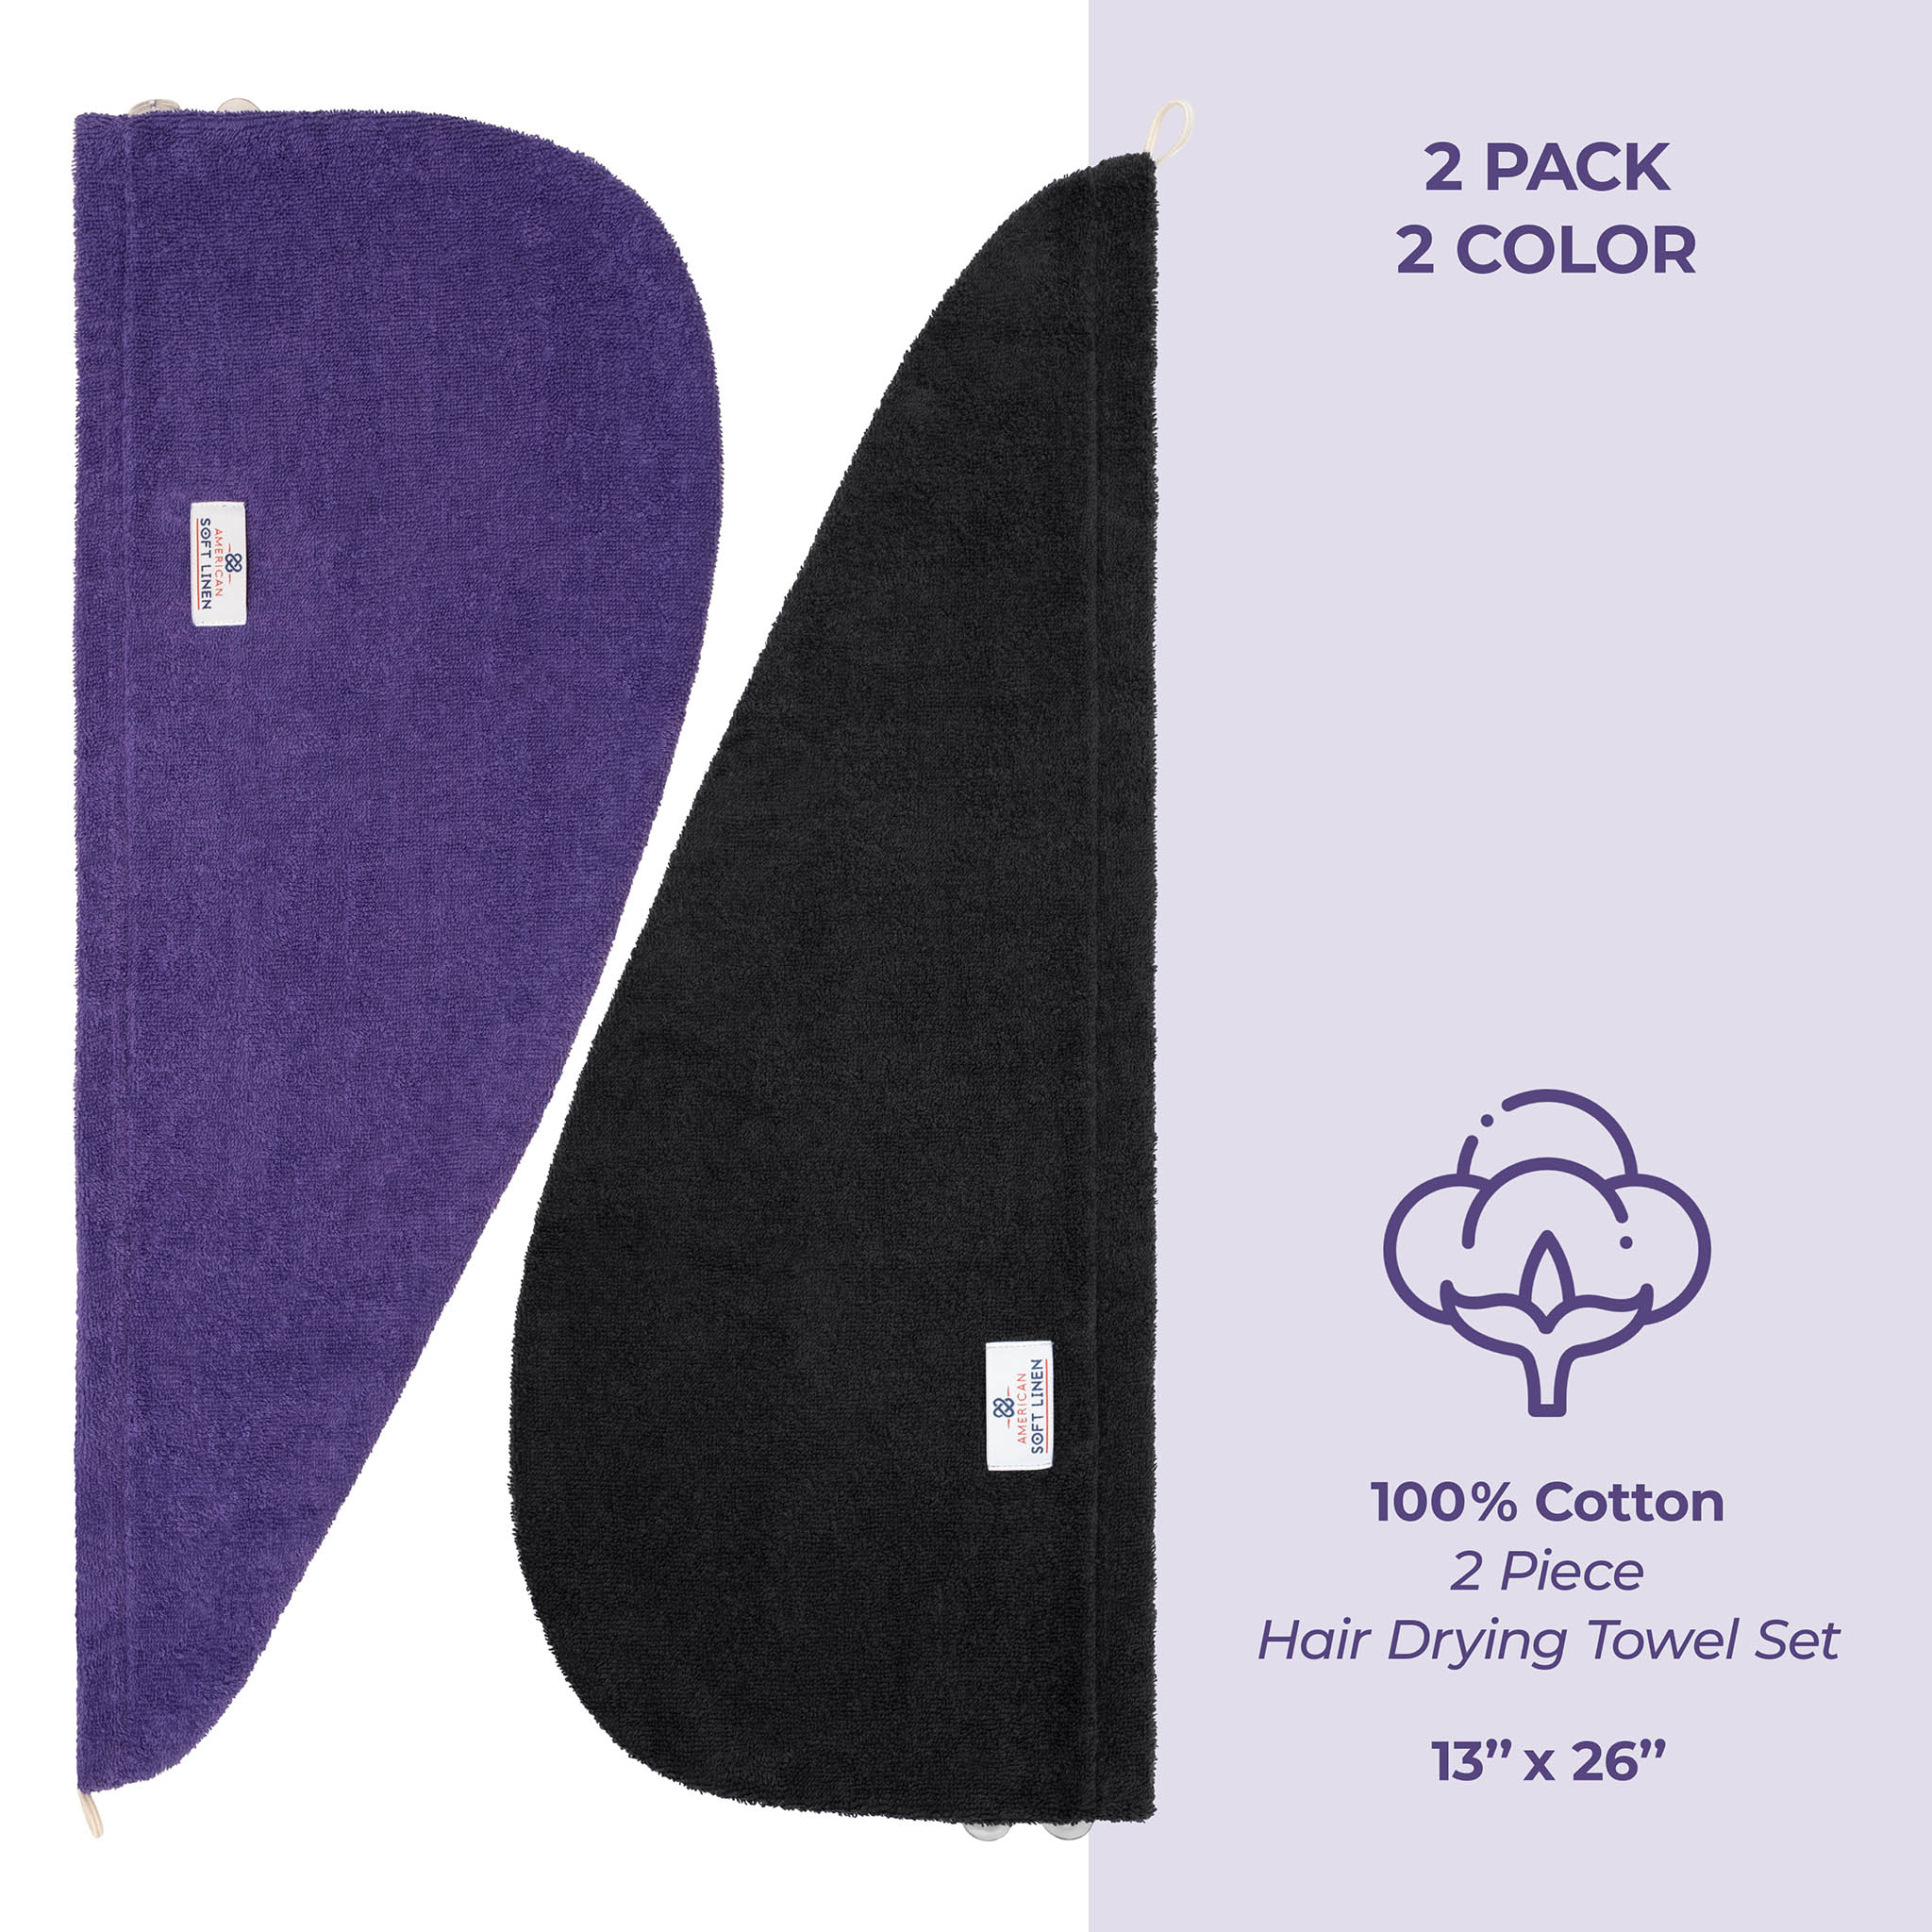 American Soft Linen 100% Cotton Hair Drying Towels for Women 2 pack 75 set case pack purple-black-5